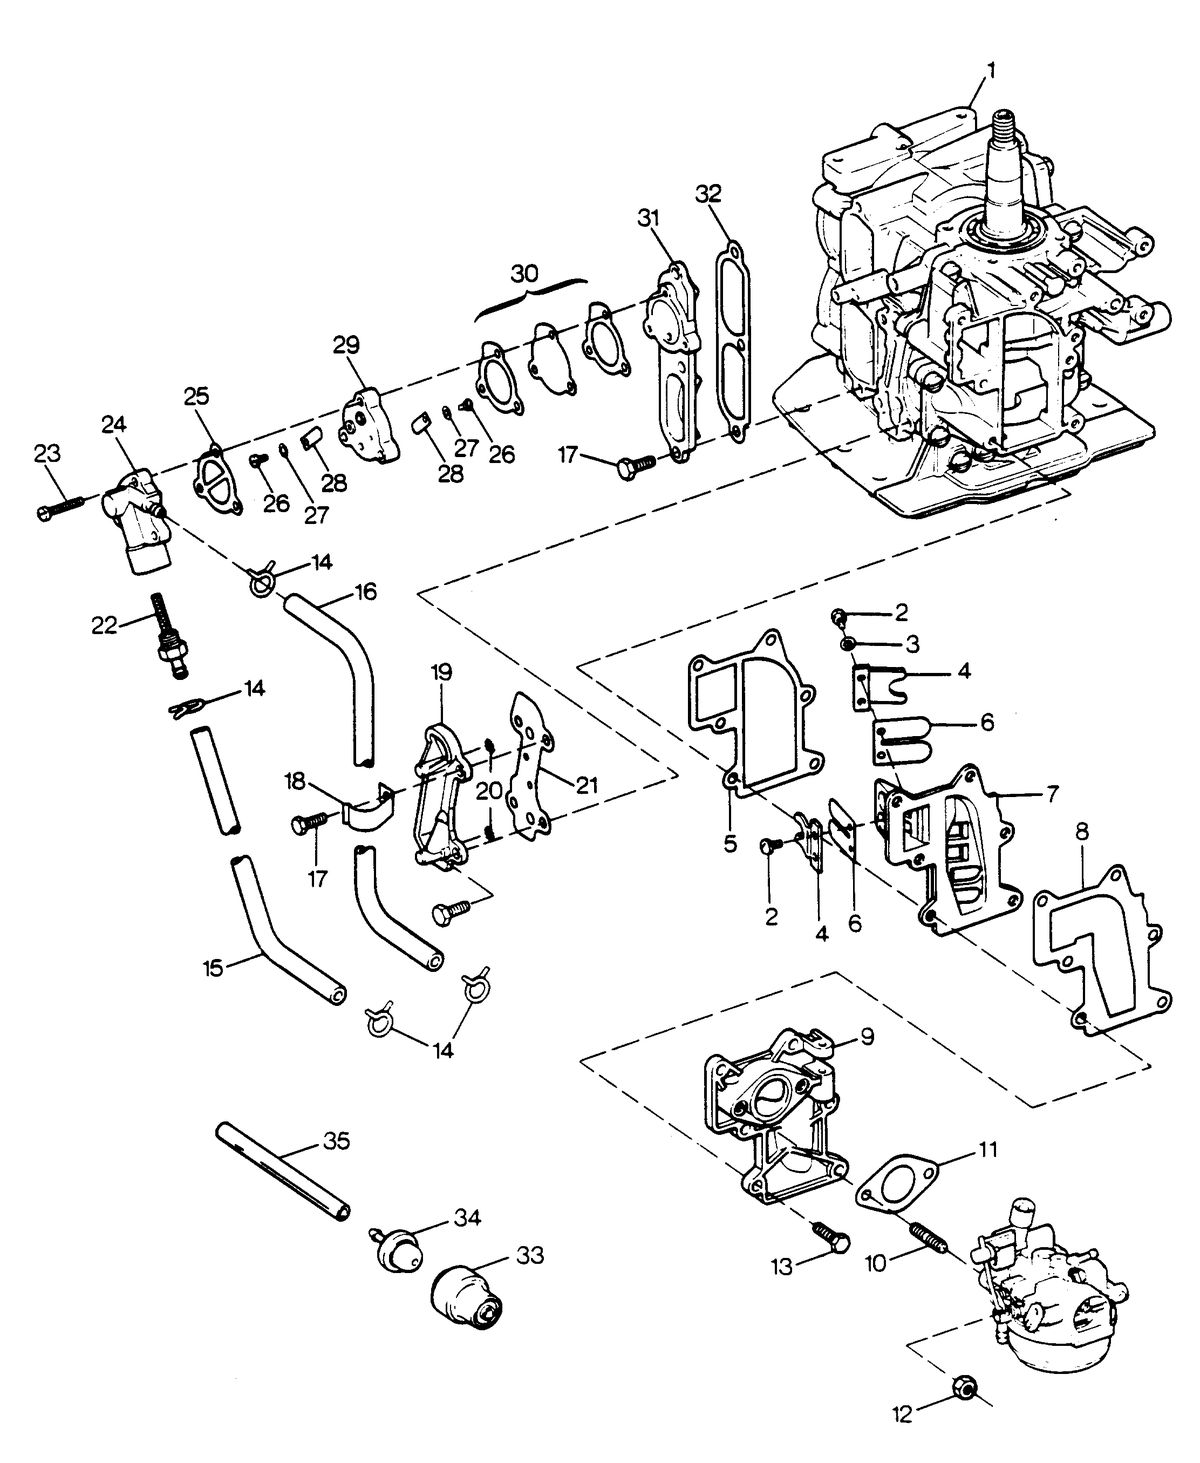 SEARS SEARS 15 H.P. FUEL INTAKE AND RECIRCULATION SYSTEM